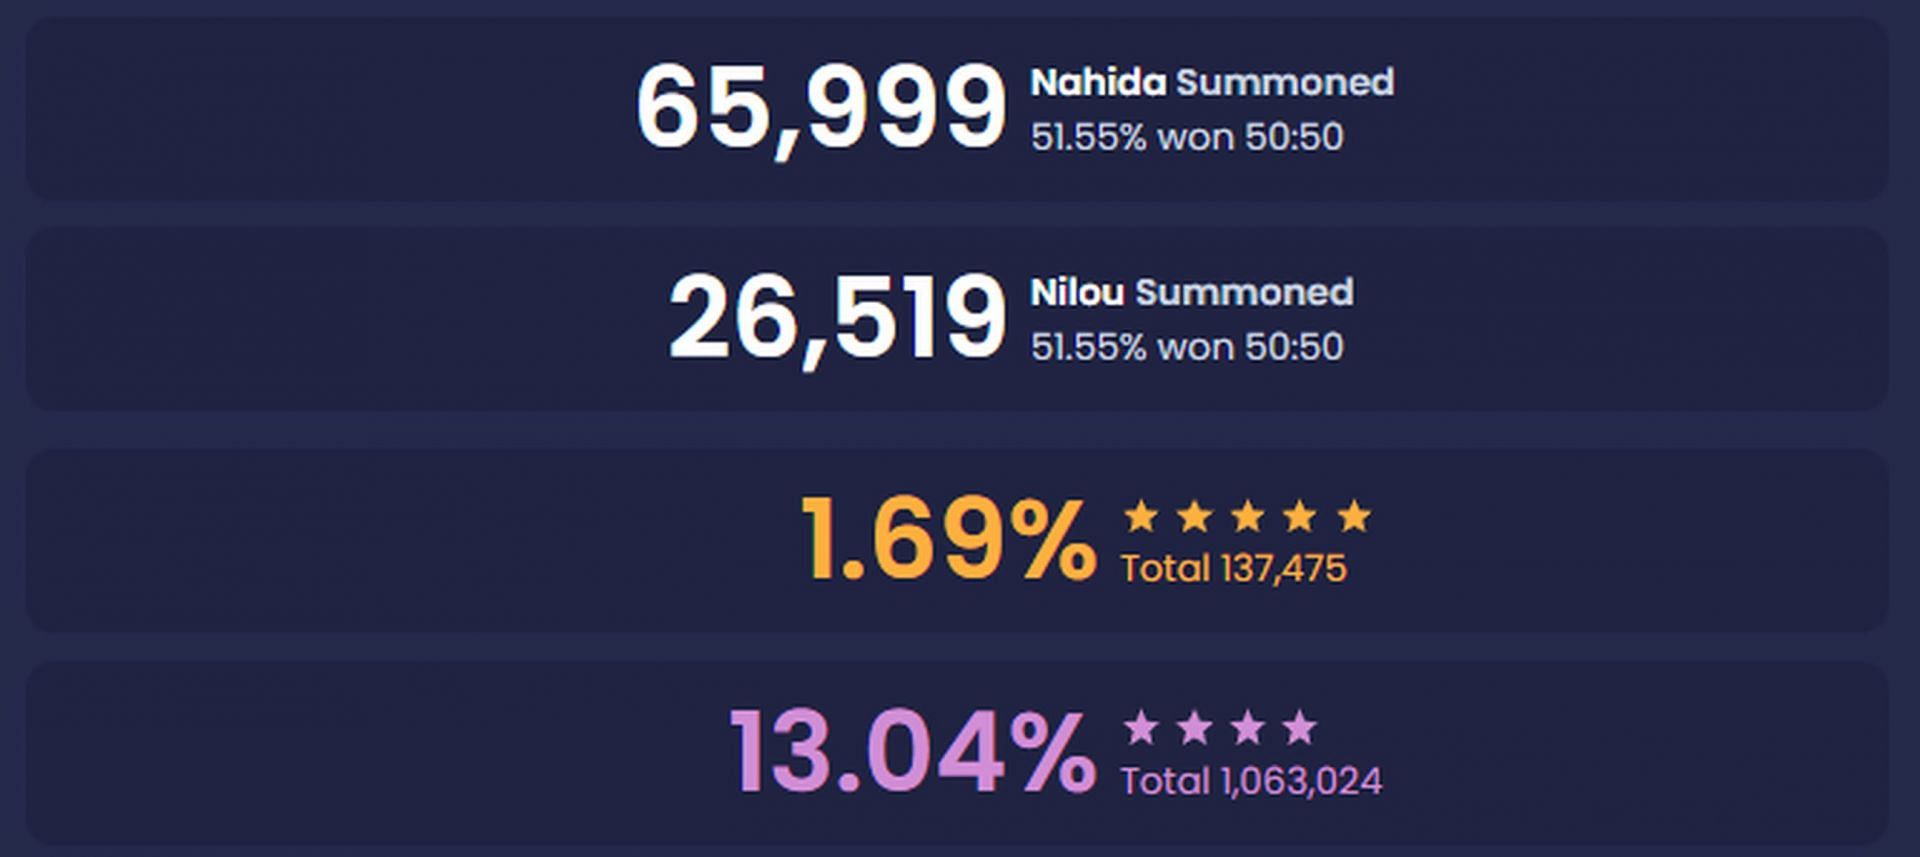 Other data indicates that Nilou was less popular (Image via HoYoverse)